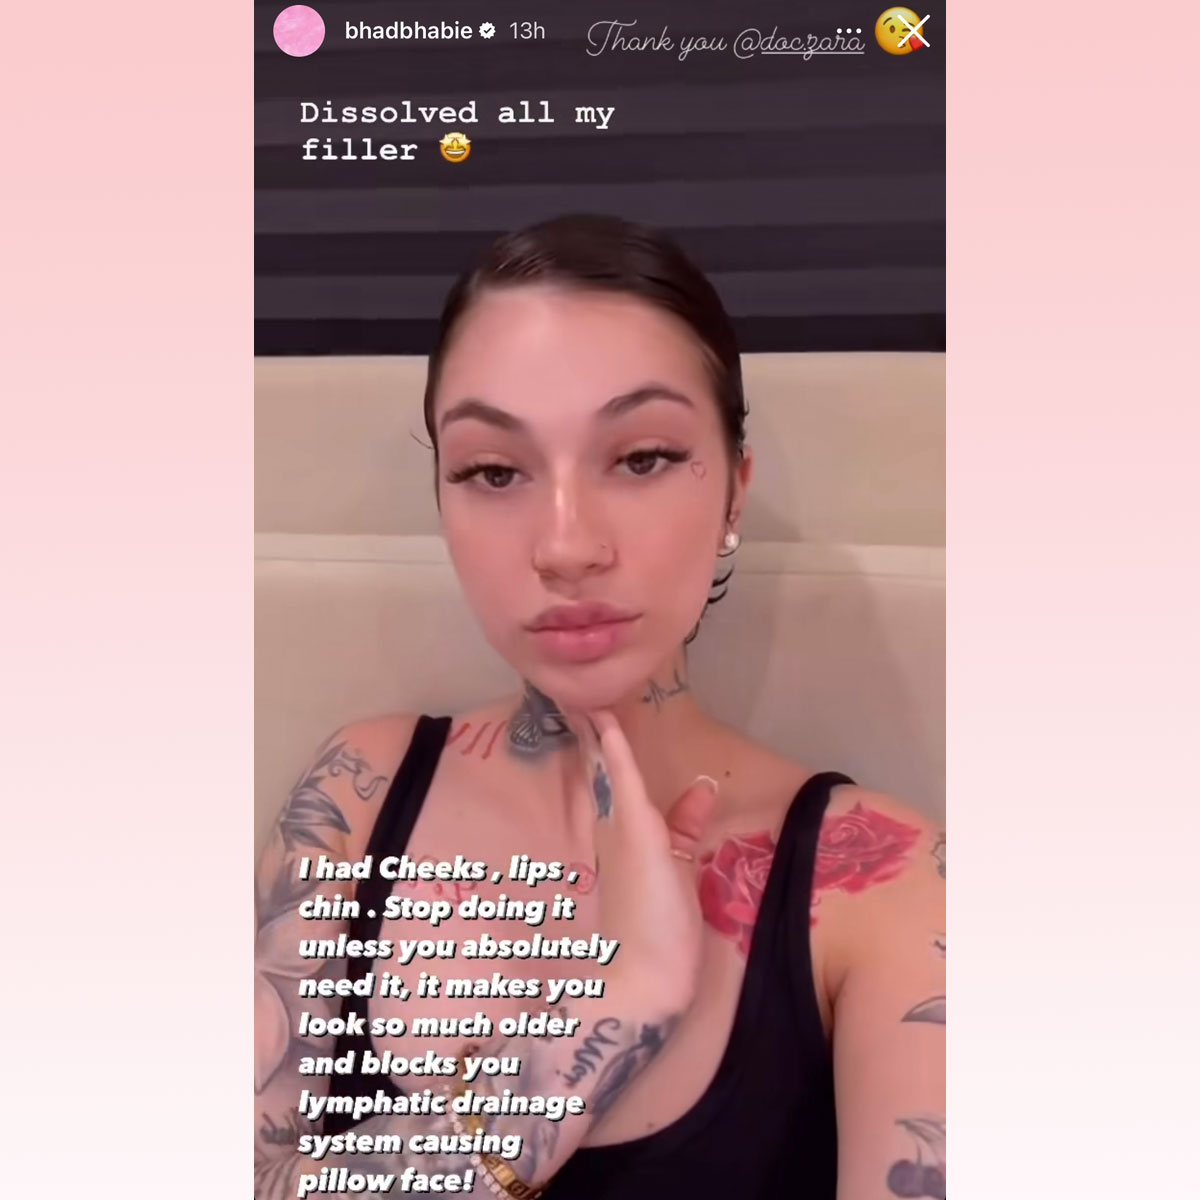 Bhad Bhabie Dissolved All Her Filler!